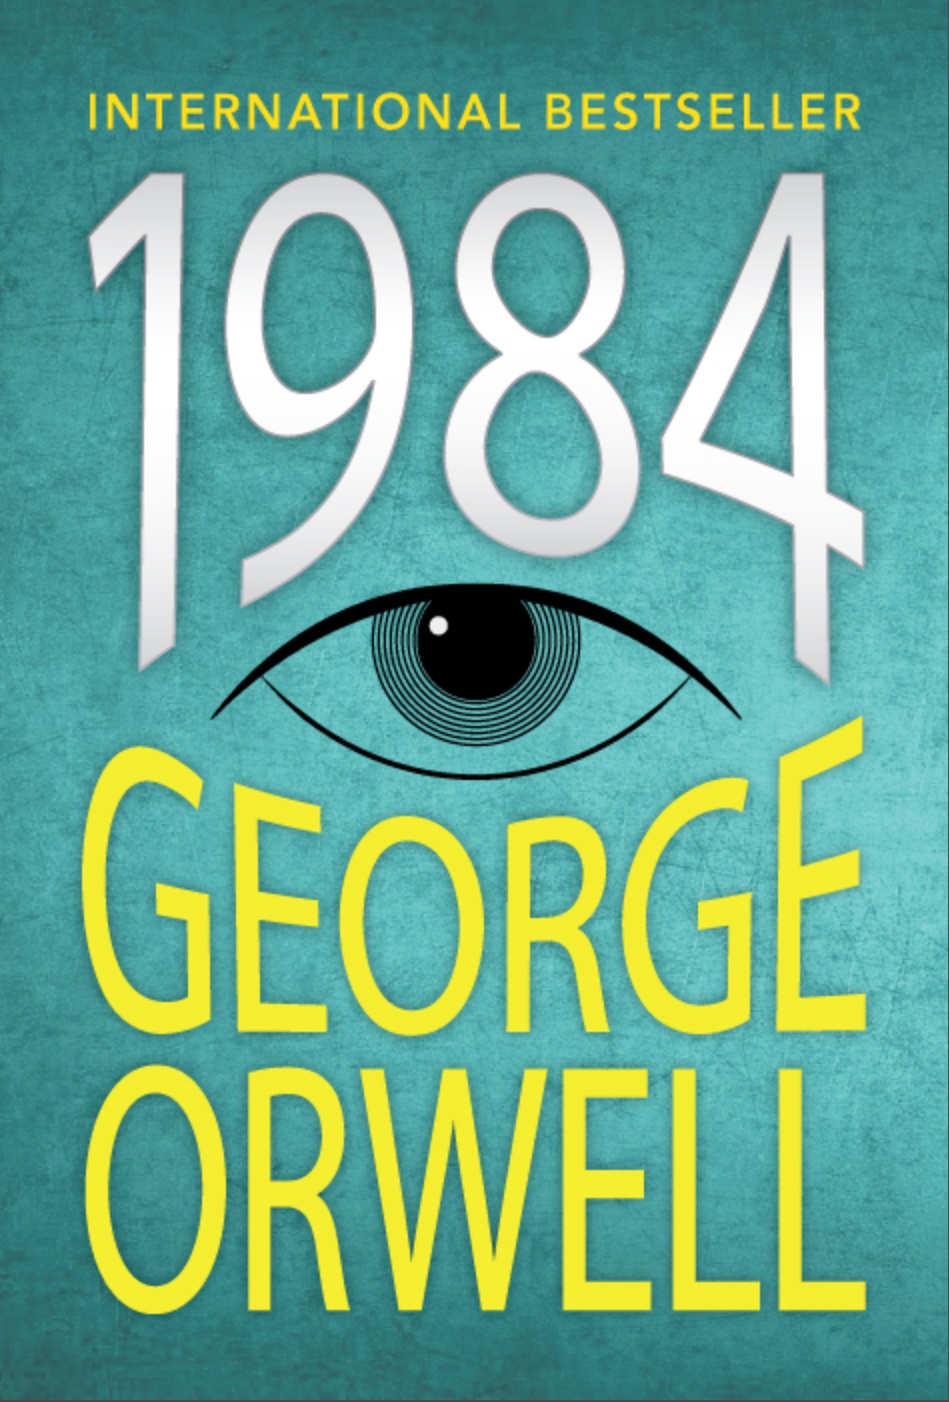 1984 is the second book in my second list of books